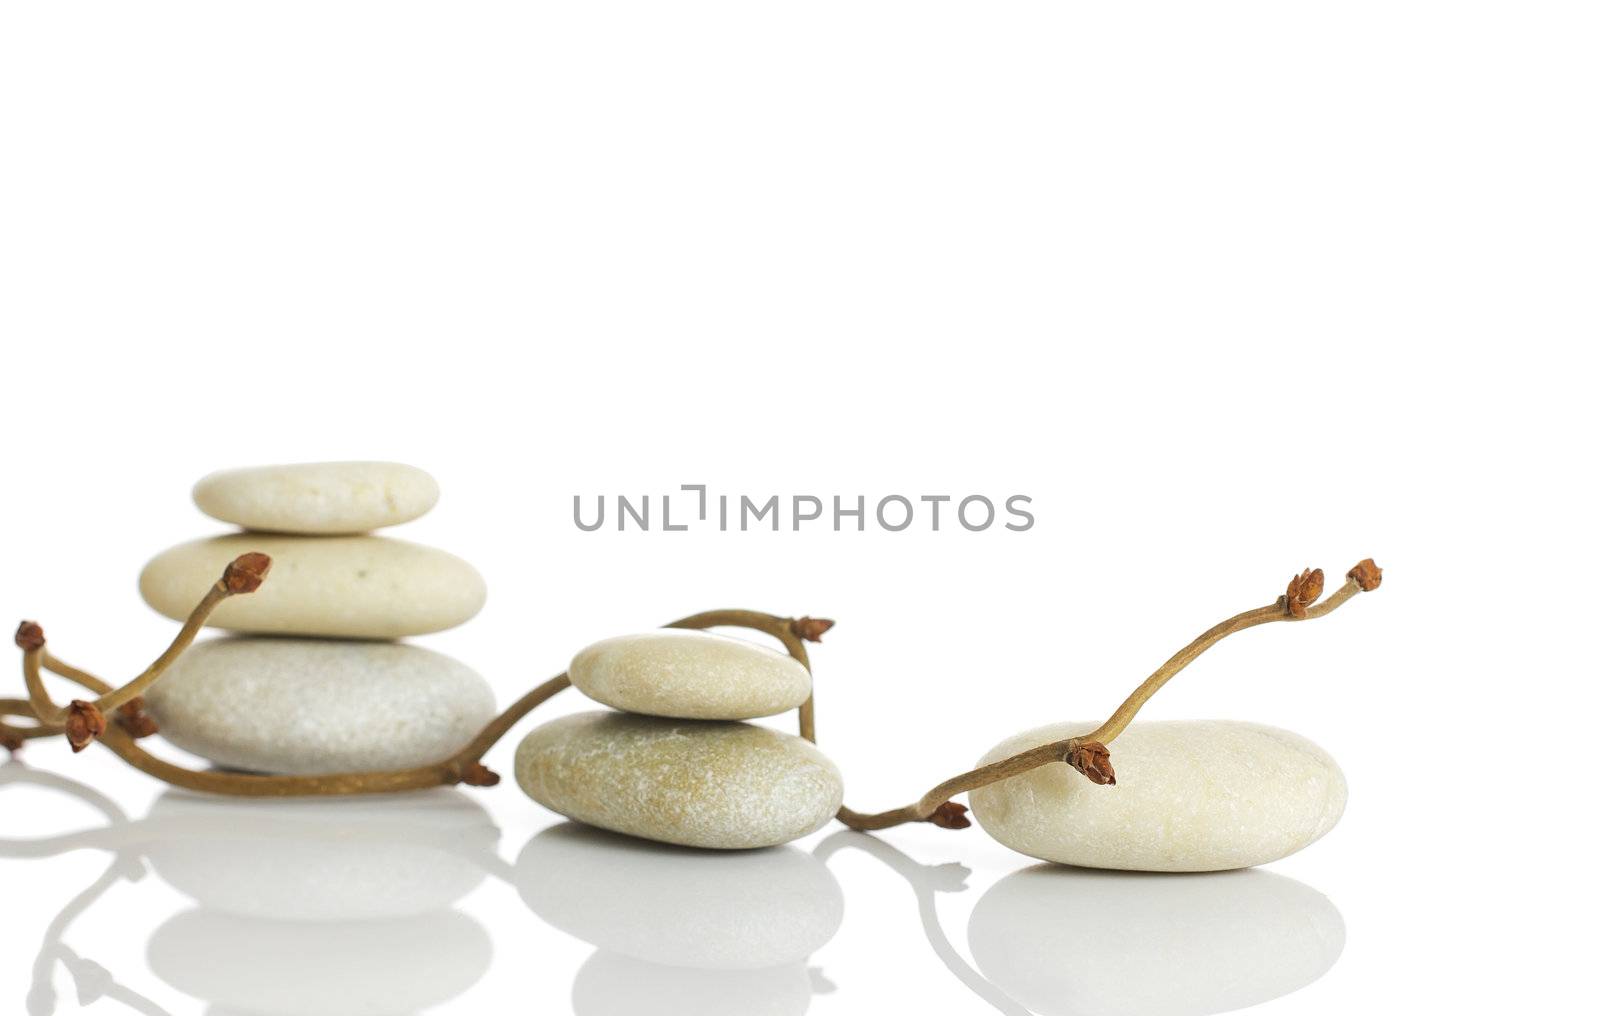 Spa stones and dry hazel branches, isolated on white background.